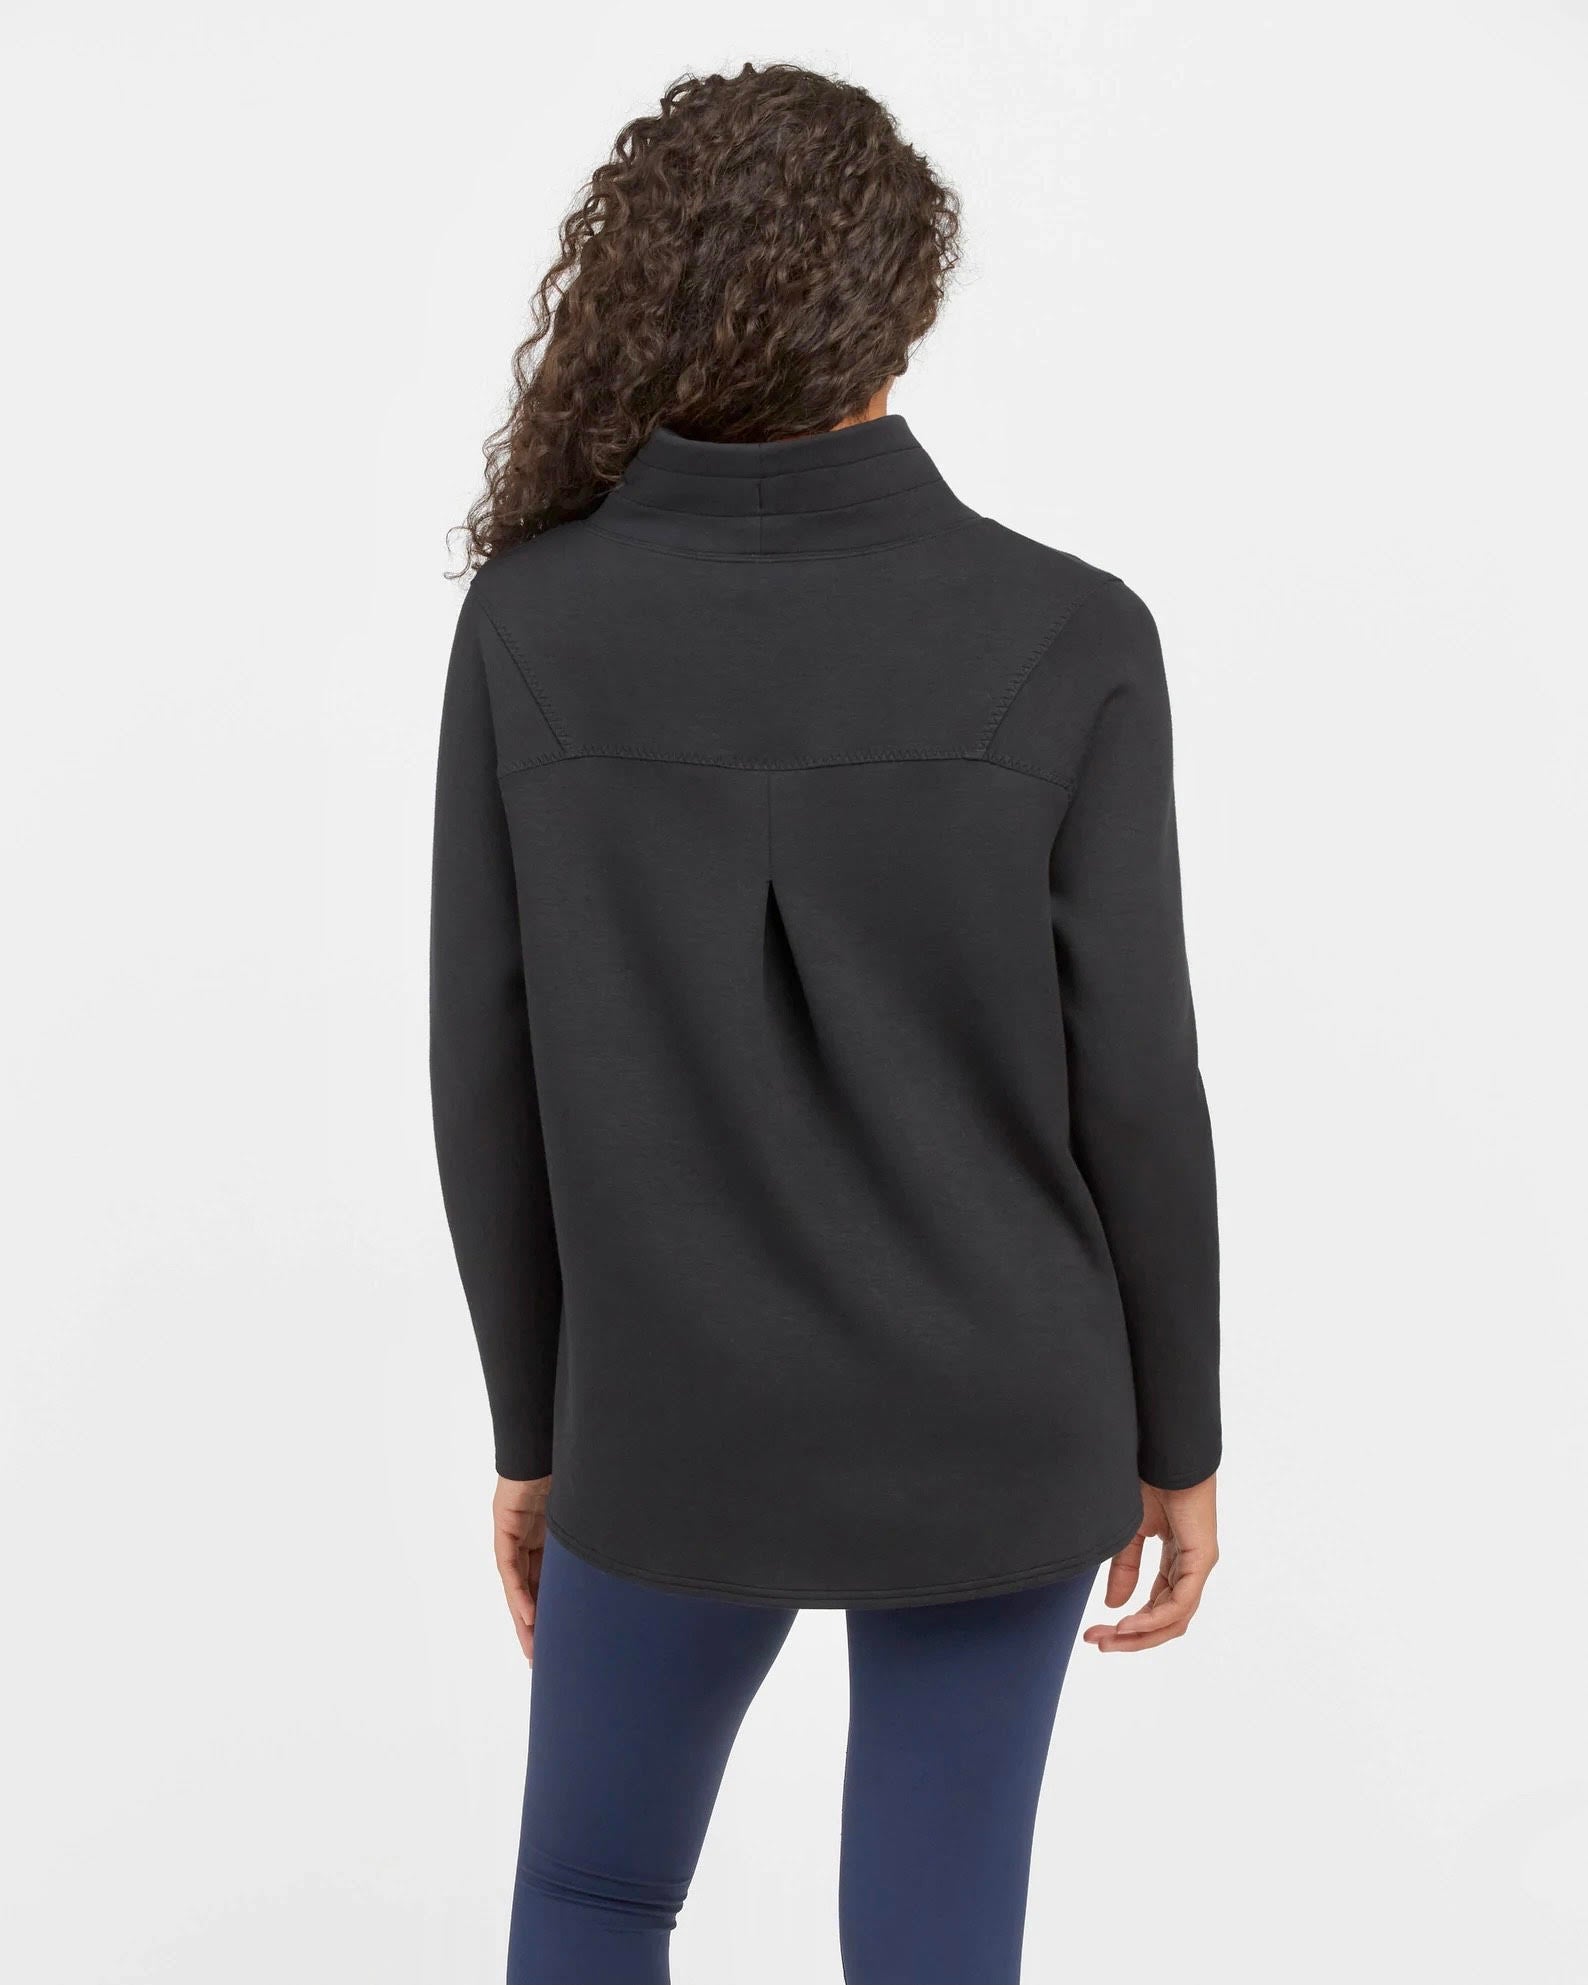 Spanx AirEssentials Got-Ya Covered Pullover - Light Cloudy Grey